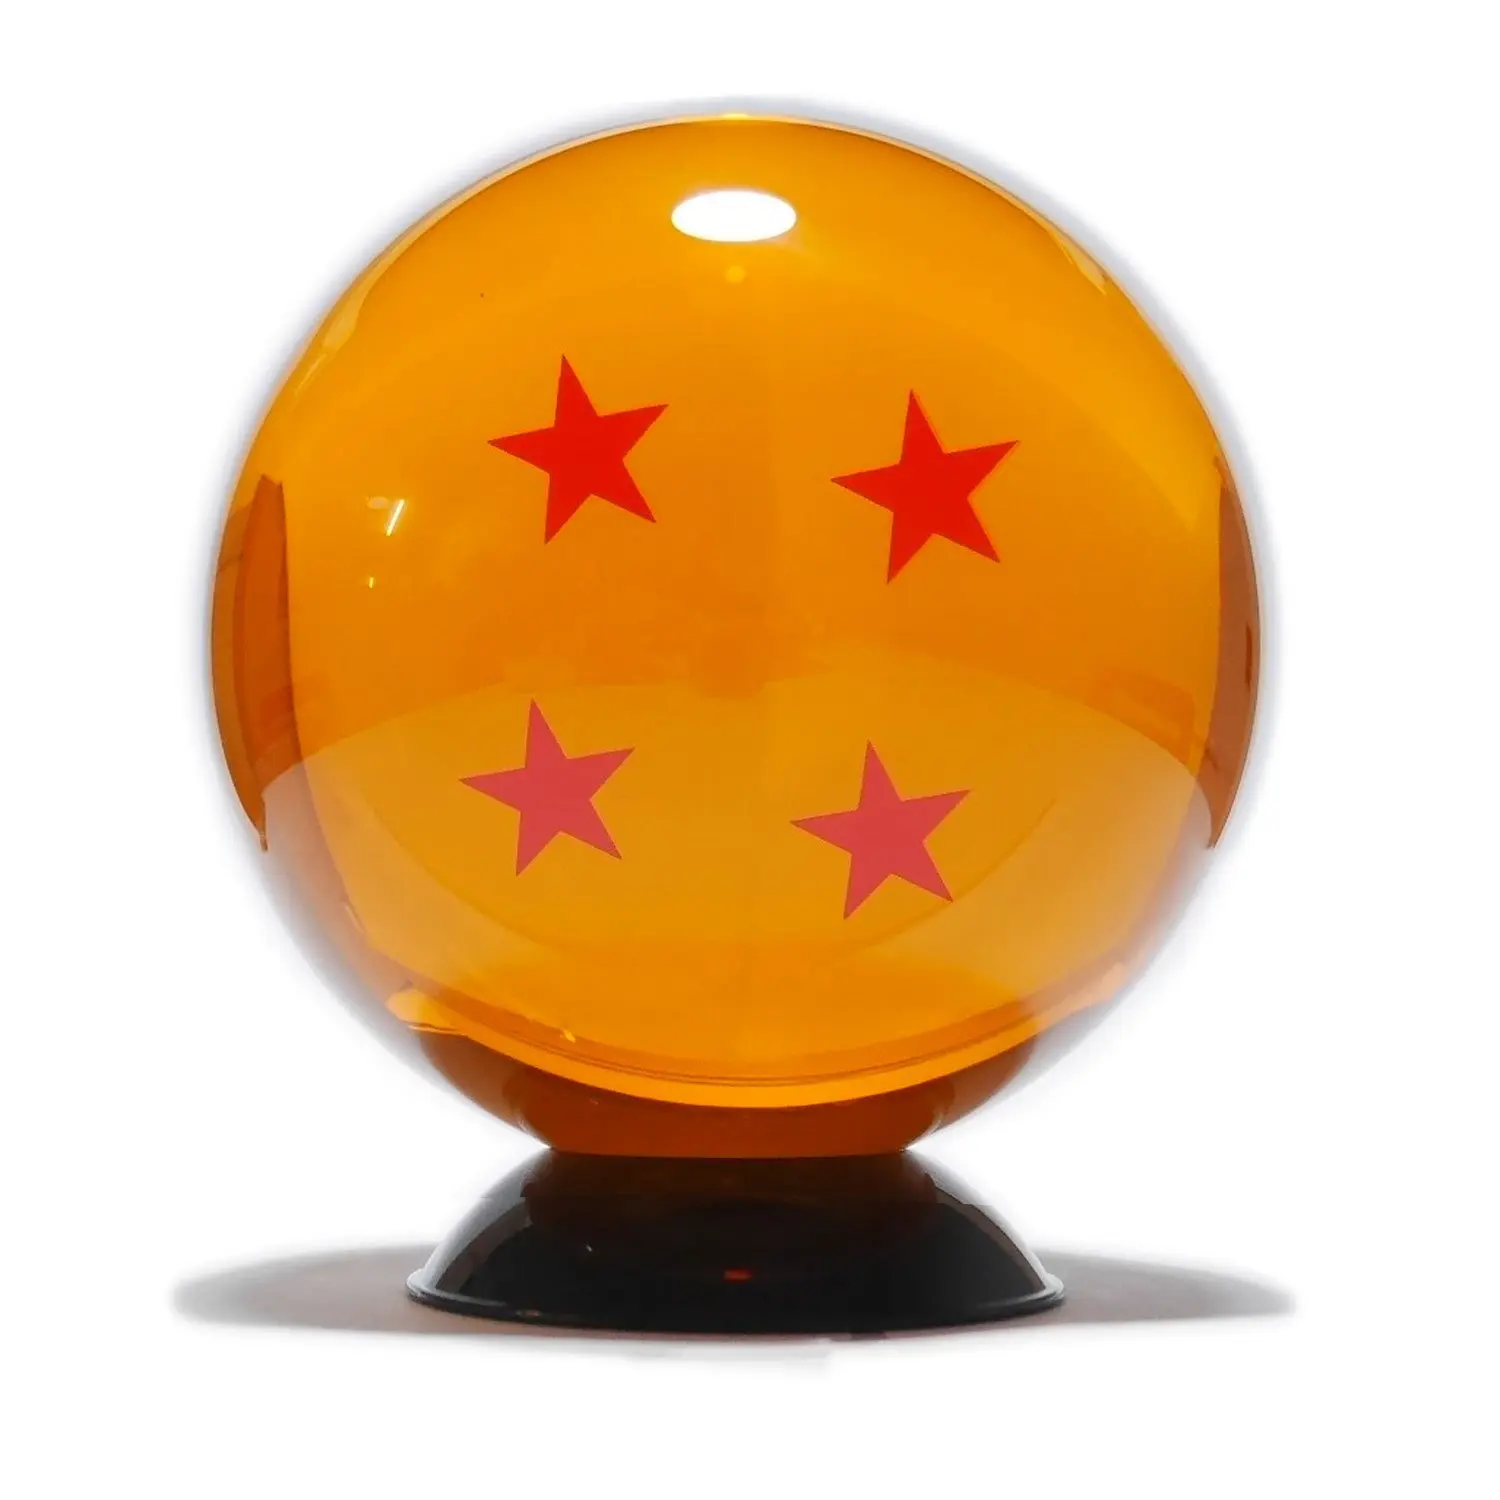 Buy Acrylic Dragon Star Replica Ball Special Edition 6 Stars Extra Large 10 Cm By Hamee In Cheap Price On Alibaba Com